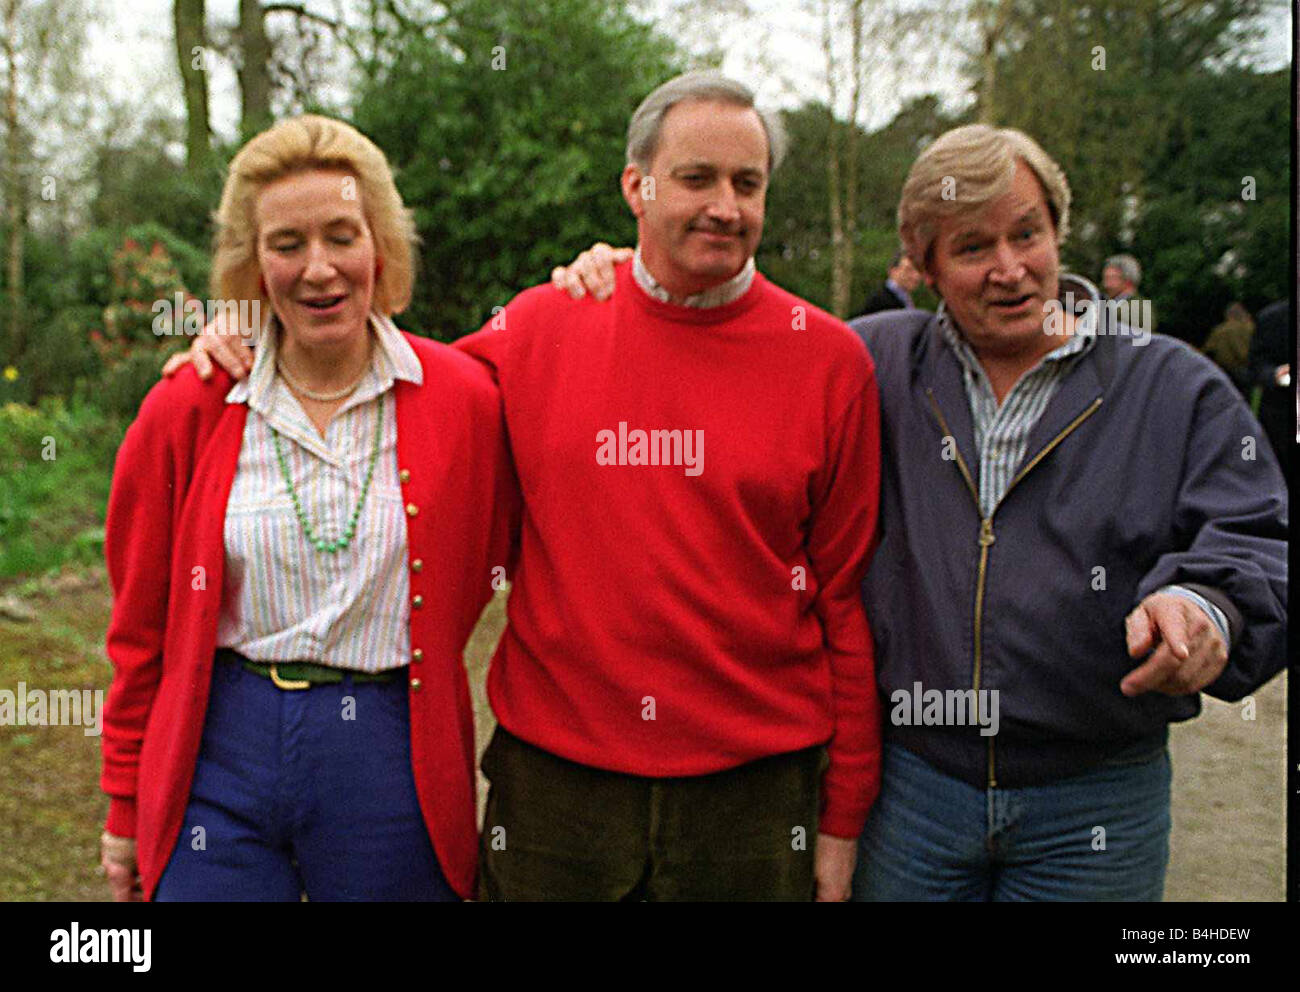 Neil Hamilton the Conservative MP at the centre of a cash for questions scandal poses for photographers outside his Cheshire home with his wife Christine and television star Bill Roache who plays Ken Barlow in Coronation Street Roache a family friend told journalists of his support for Hamilton who is coming under increasing presure to step down from the forthcoming general election in the light of the allegations made against him Stock Photo